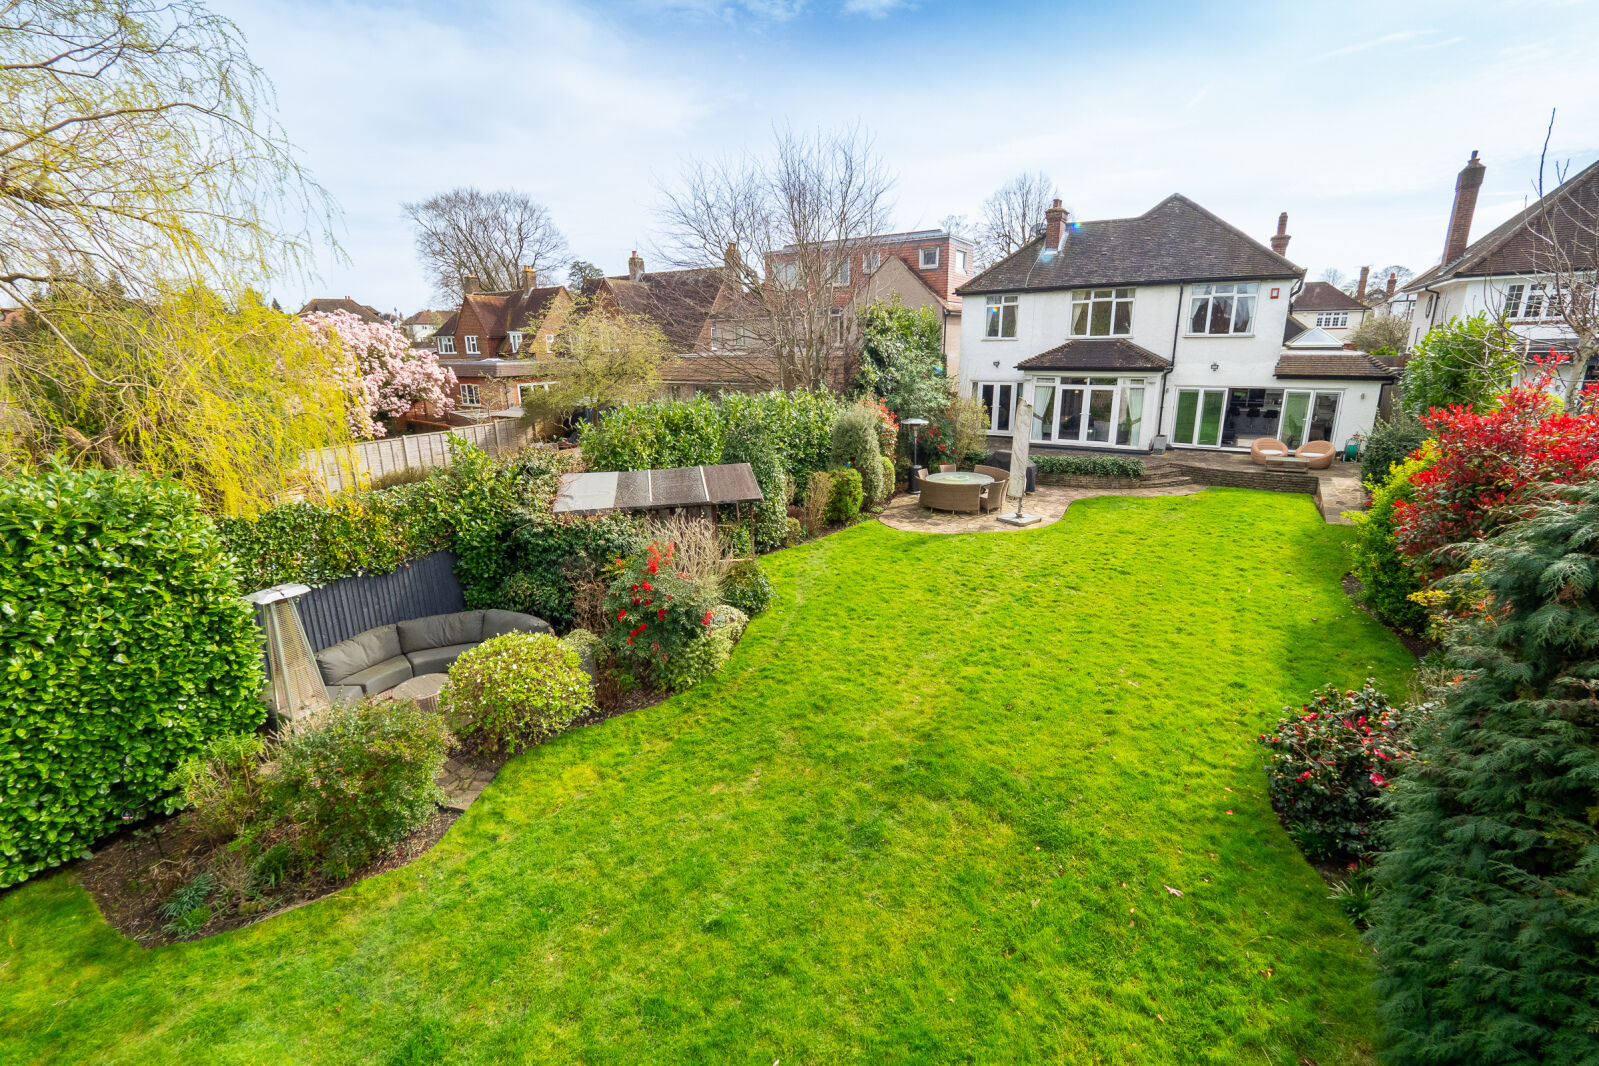 4 bedroom detached house for sale Glebe Road, Cheam, SM2, main image